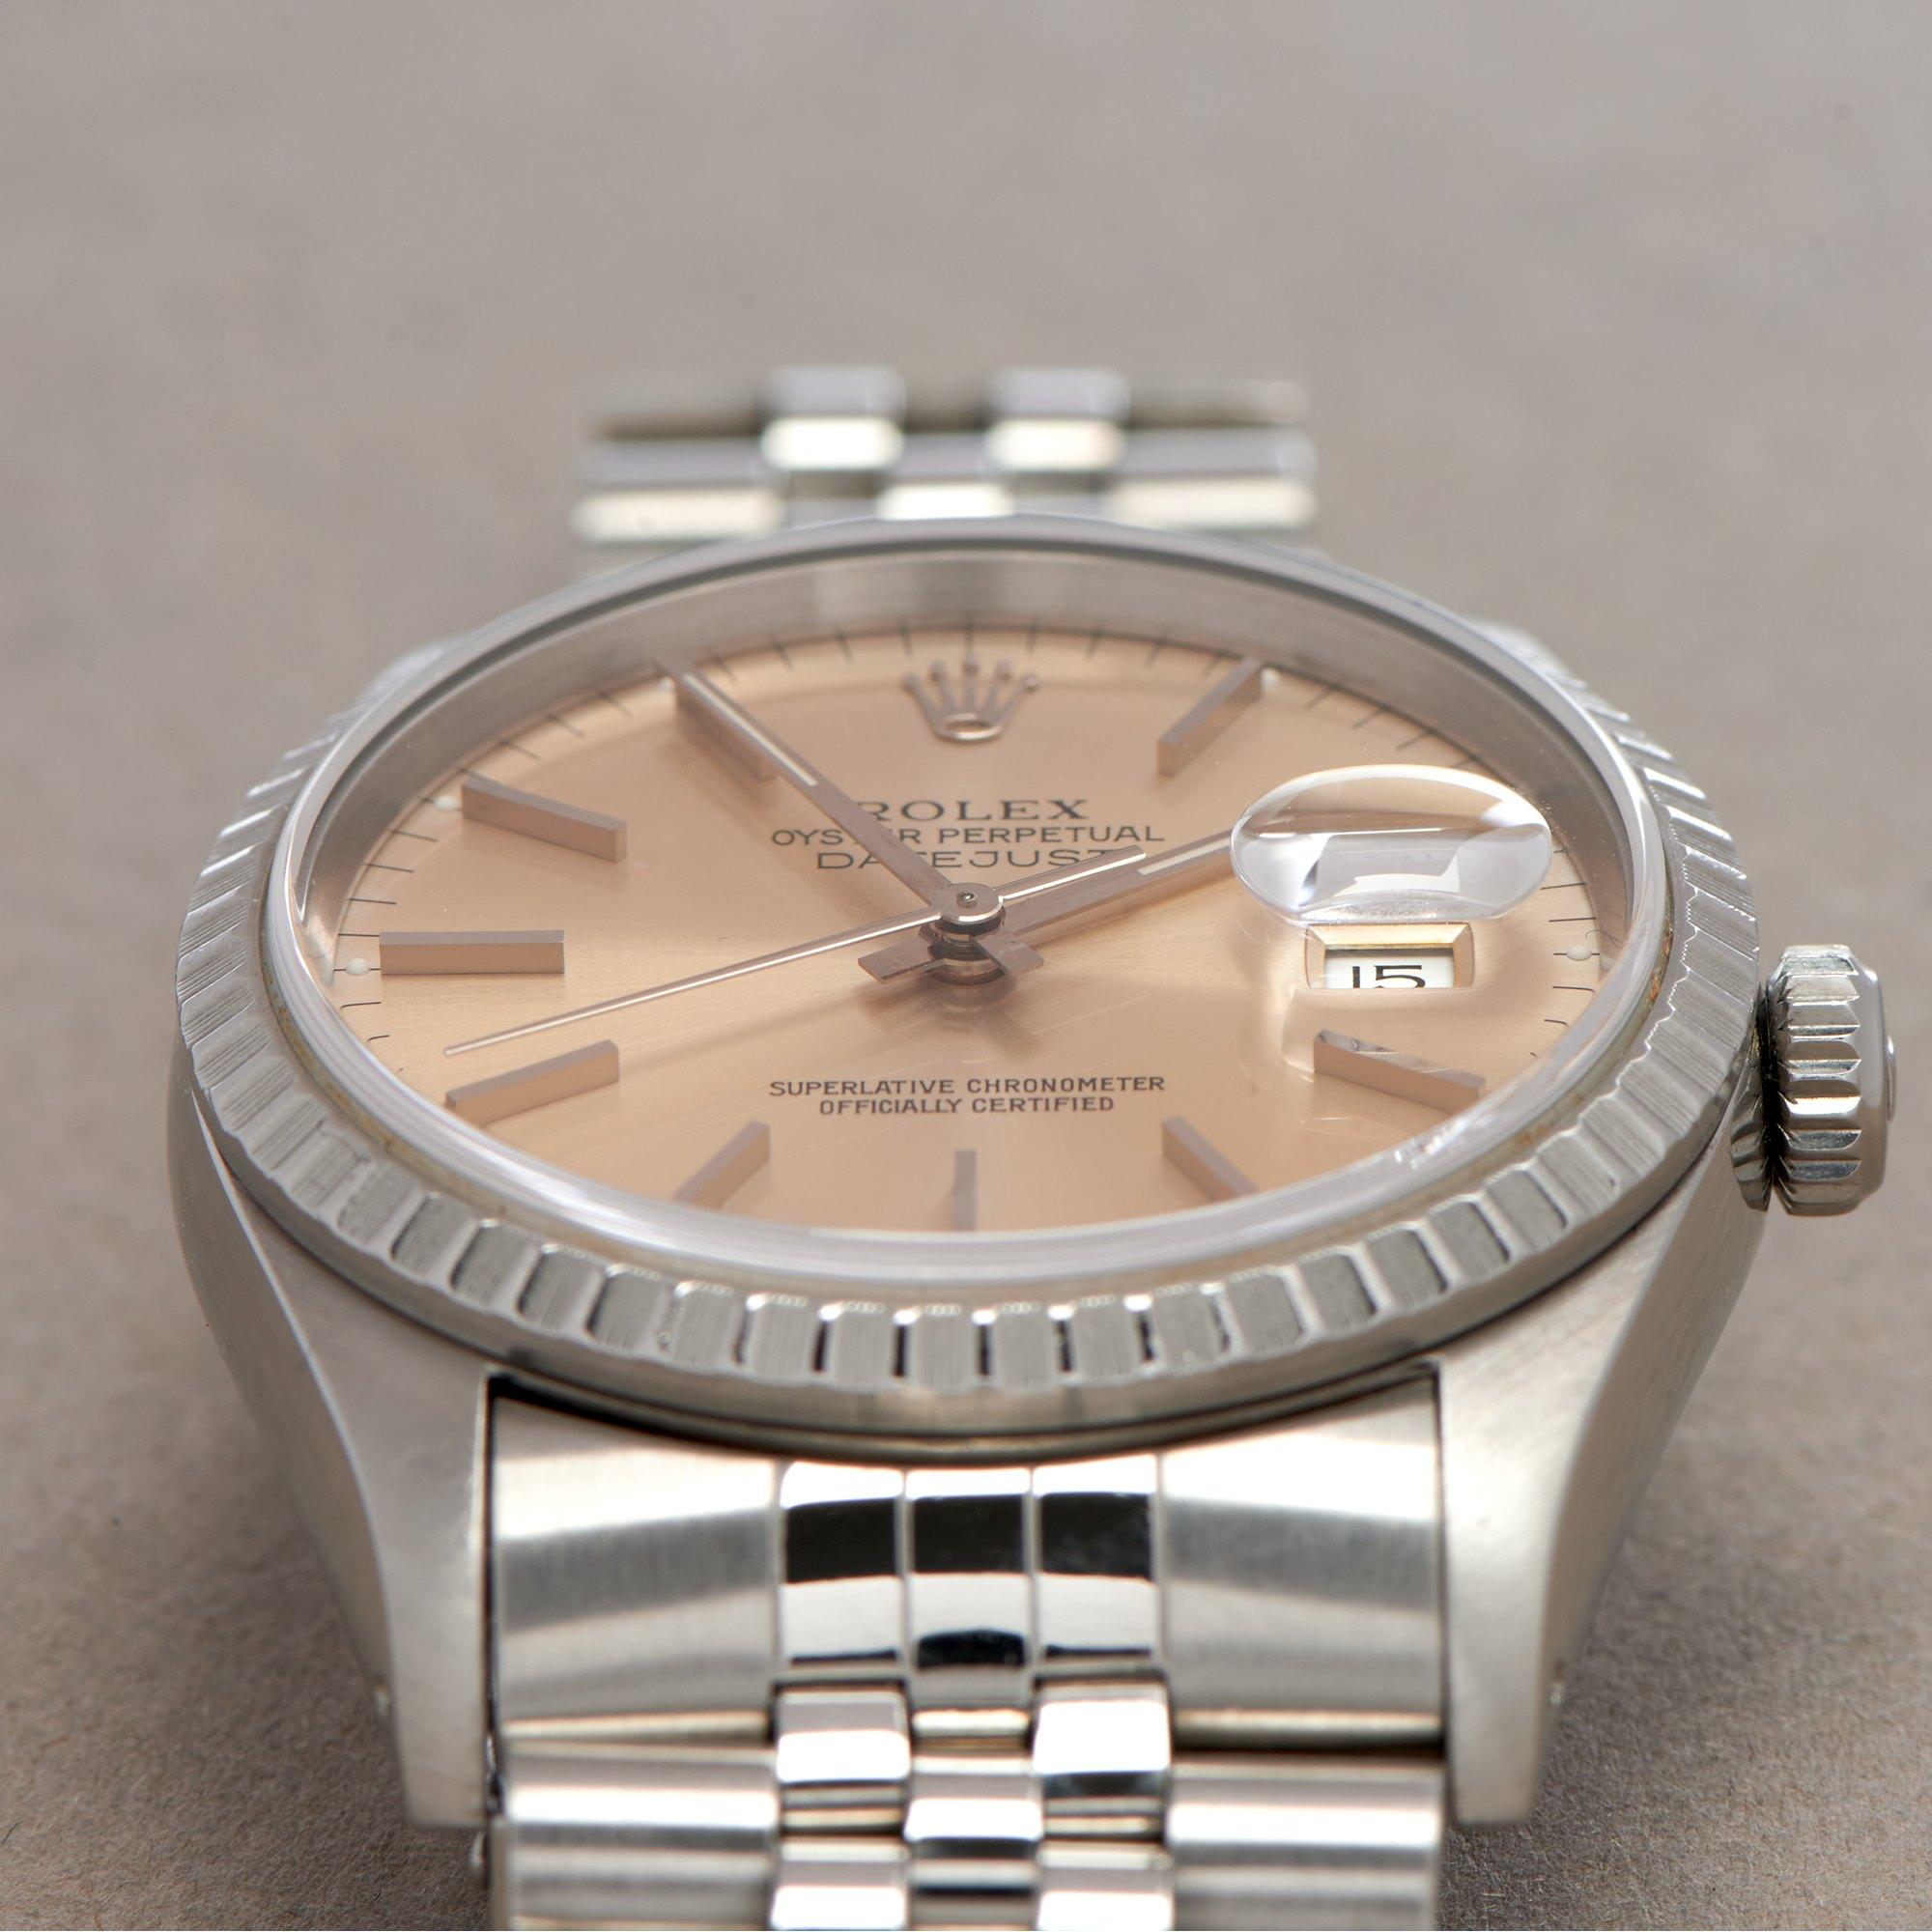 Rolex Datejust 36 16220 Men White Gold & Stainless Steel 0 Watch For Sale 2